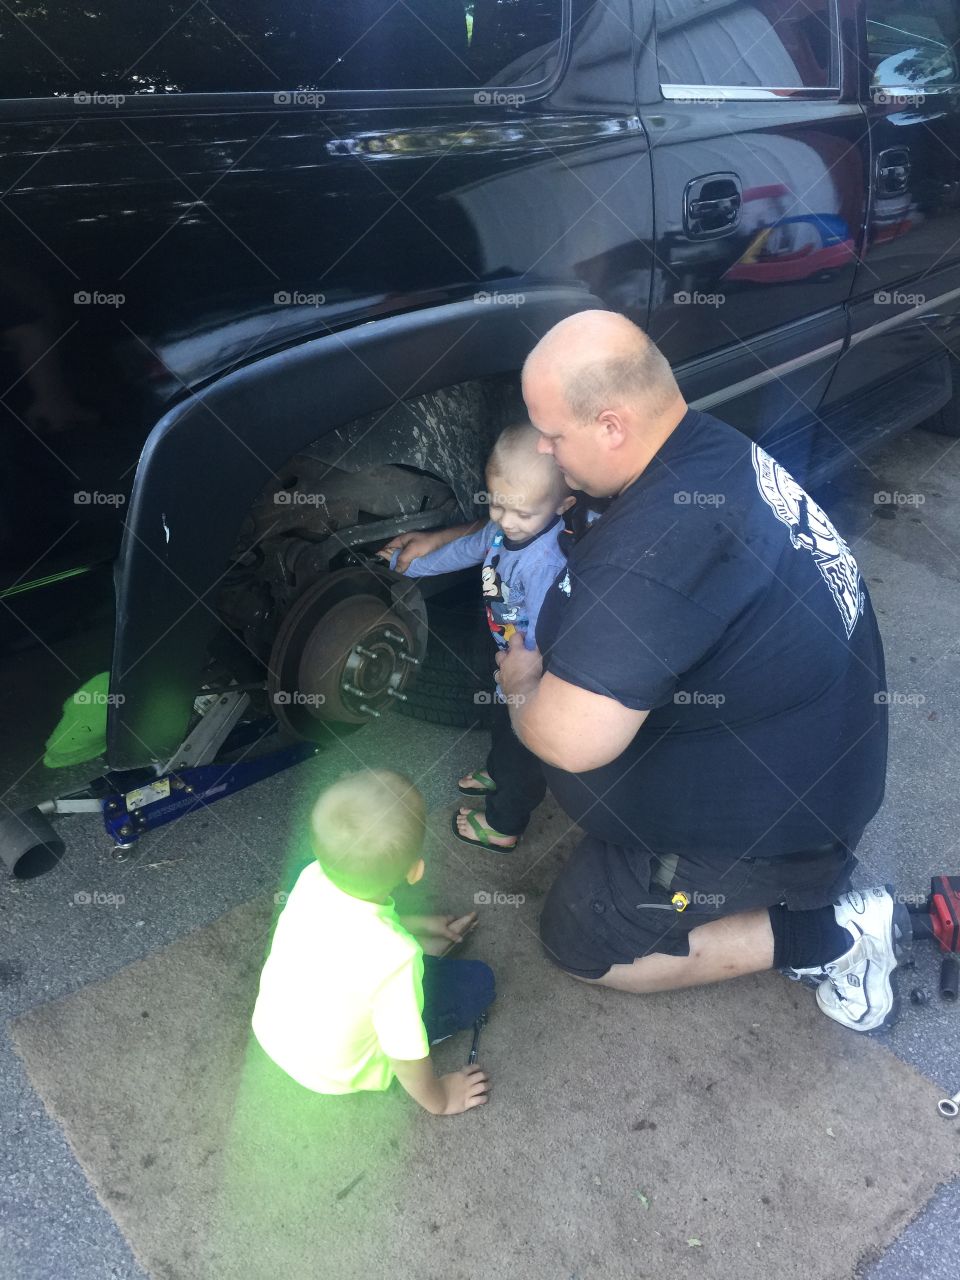 Working on cars with toddlers